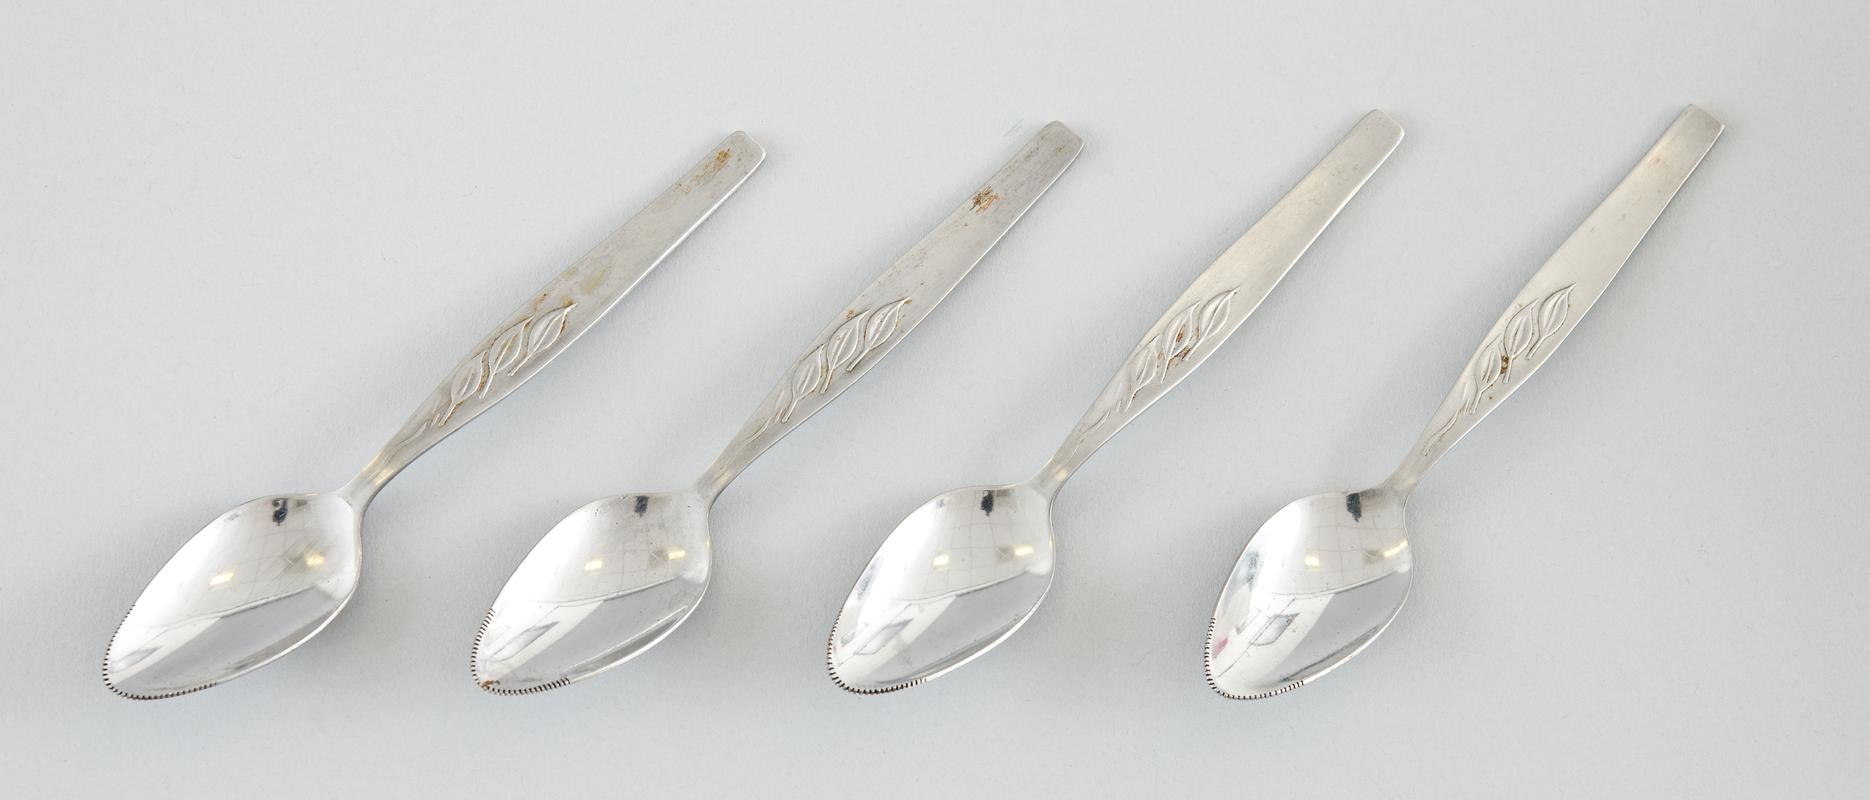 Four stainless steel grapefruit spoons, with serrated tip with leaf design on handle.